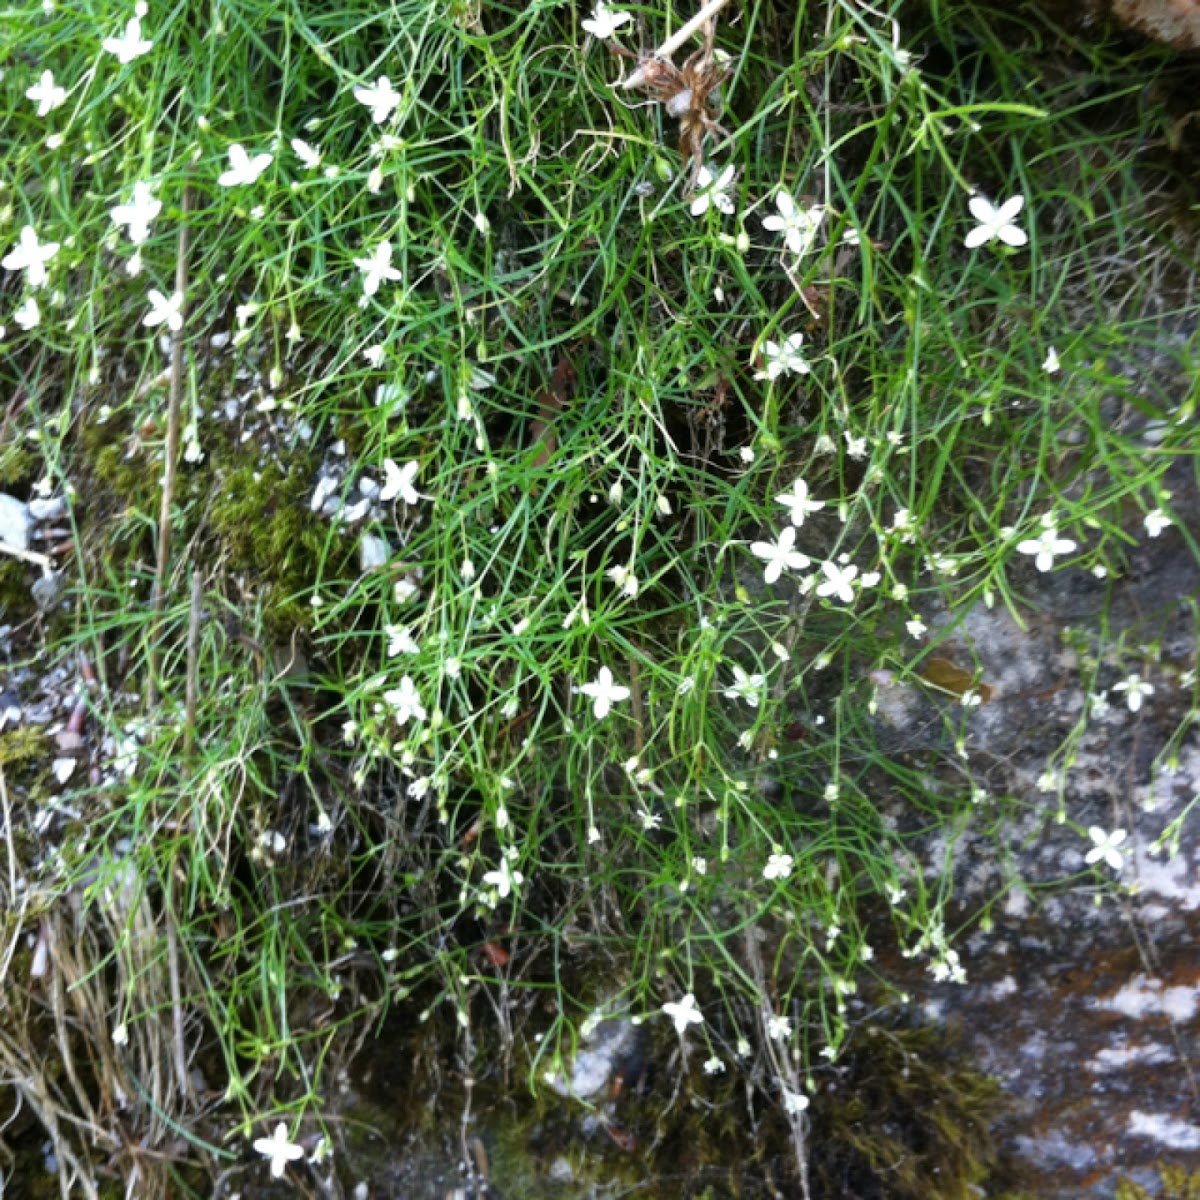 The picture is pretty blurry but it could be Wild Radish